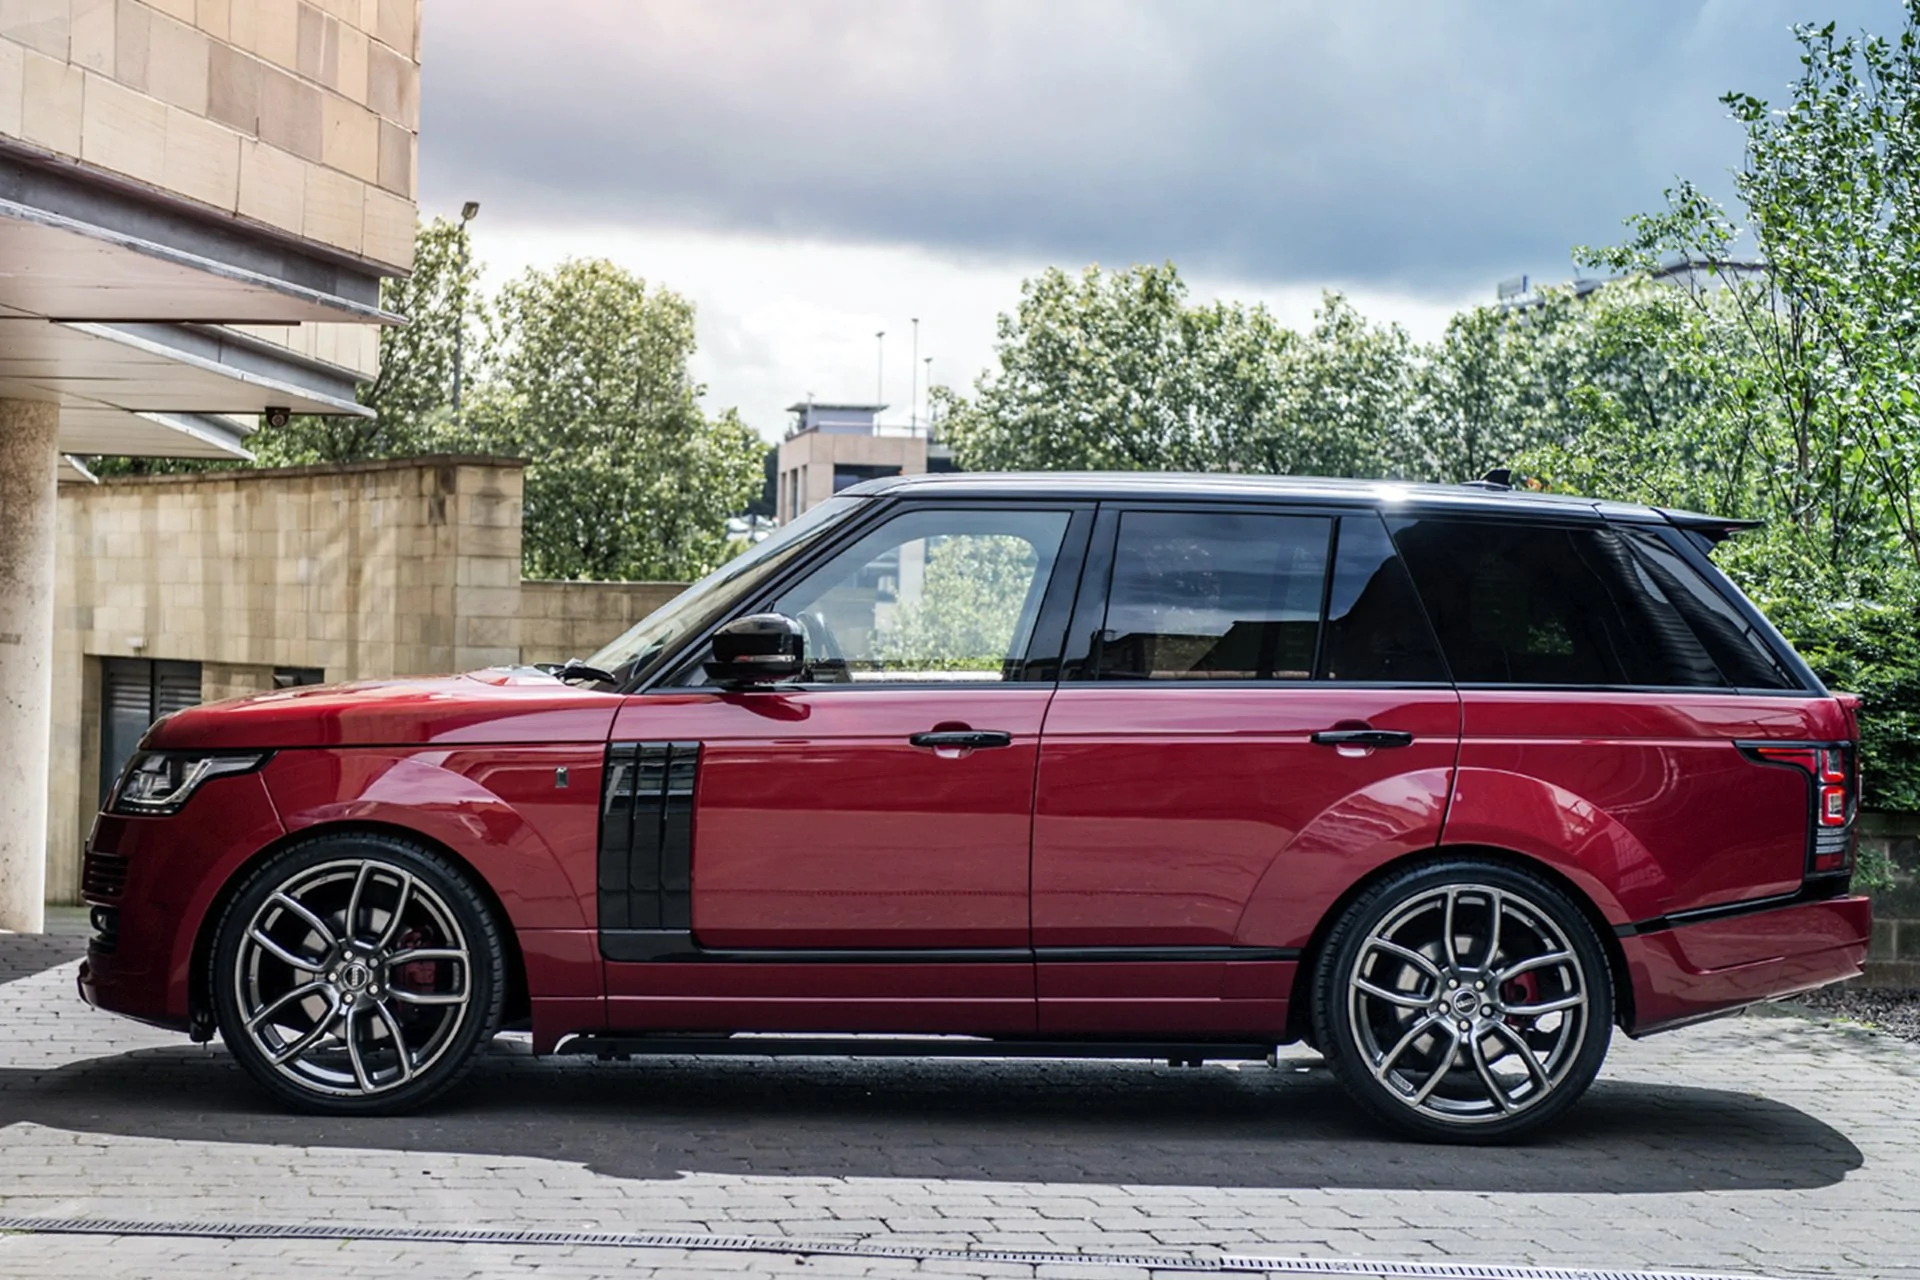 Check our price and buy Kahn Design body kit for Land Rover Range Rover Vogue RS600!